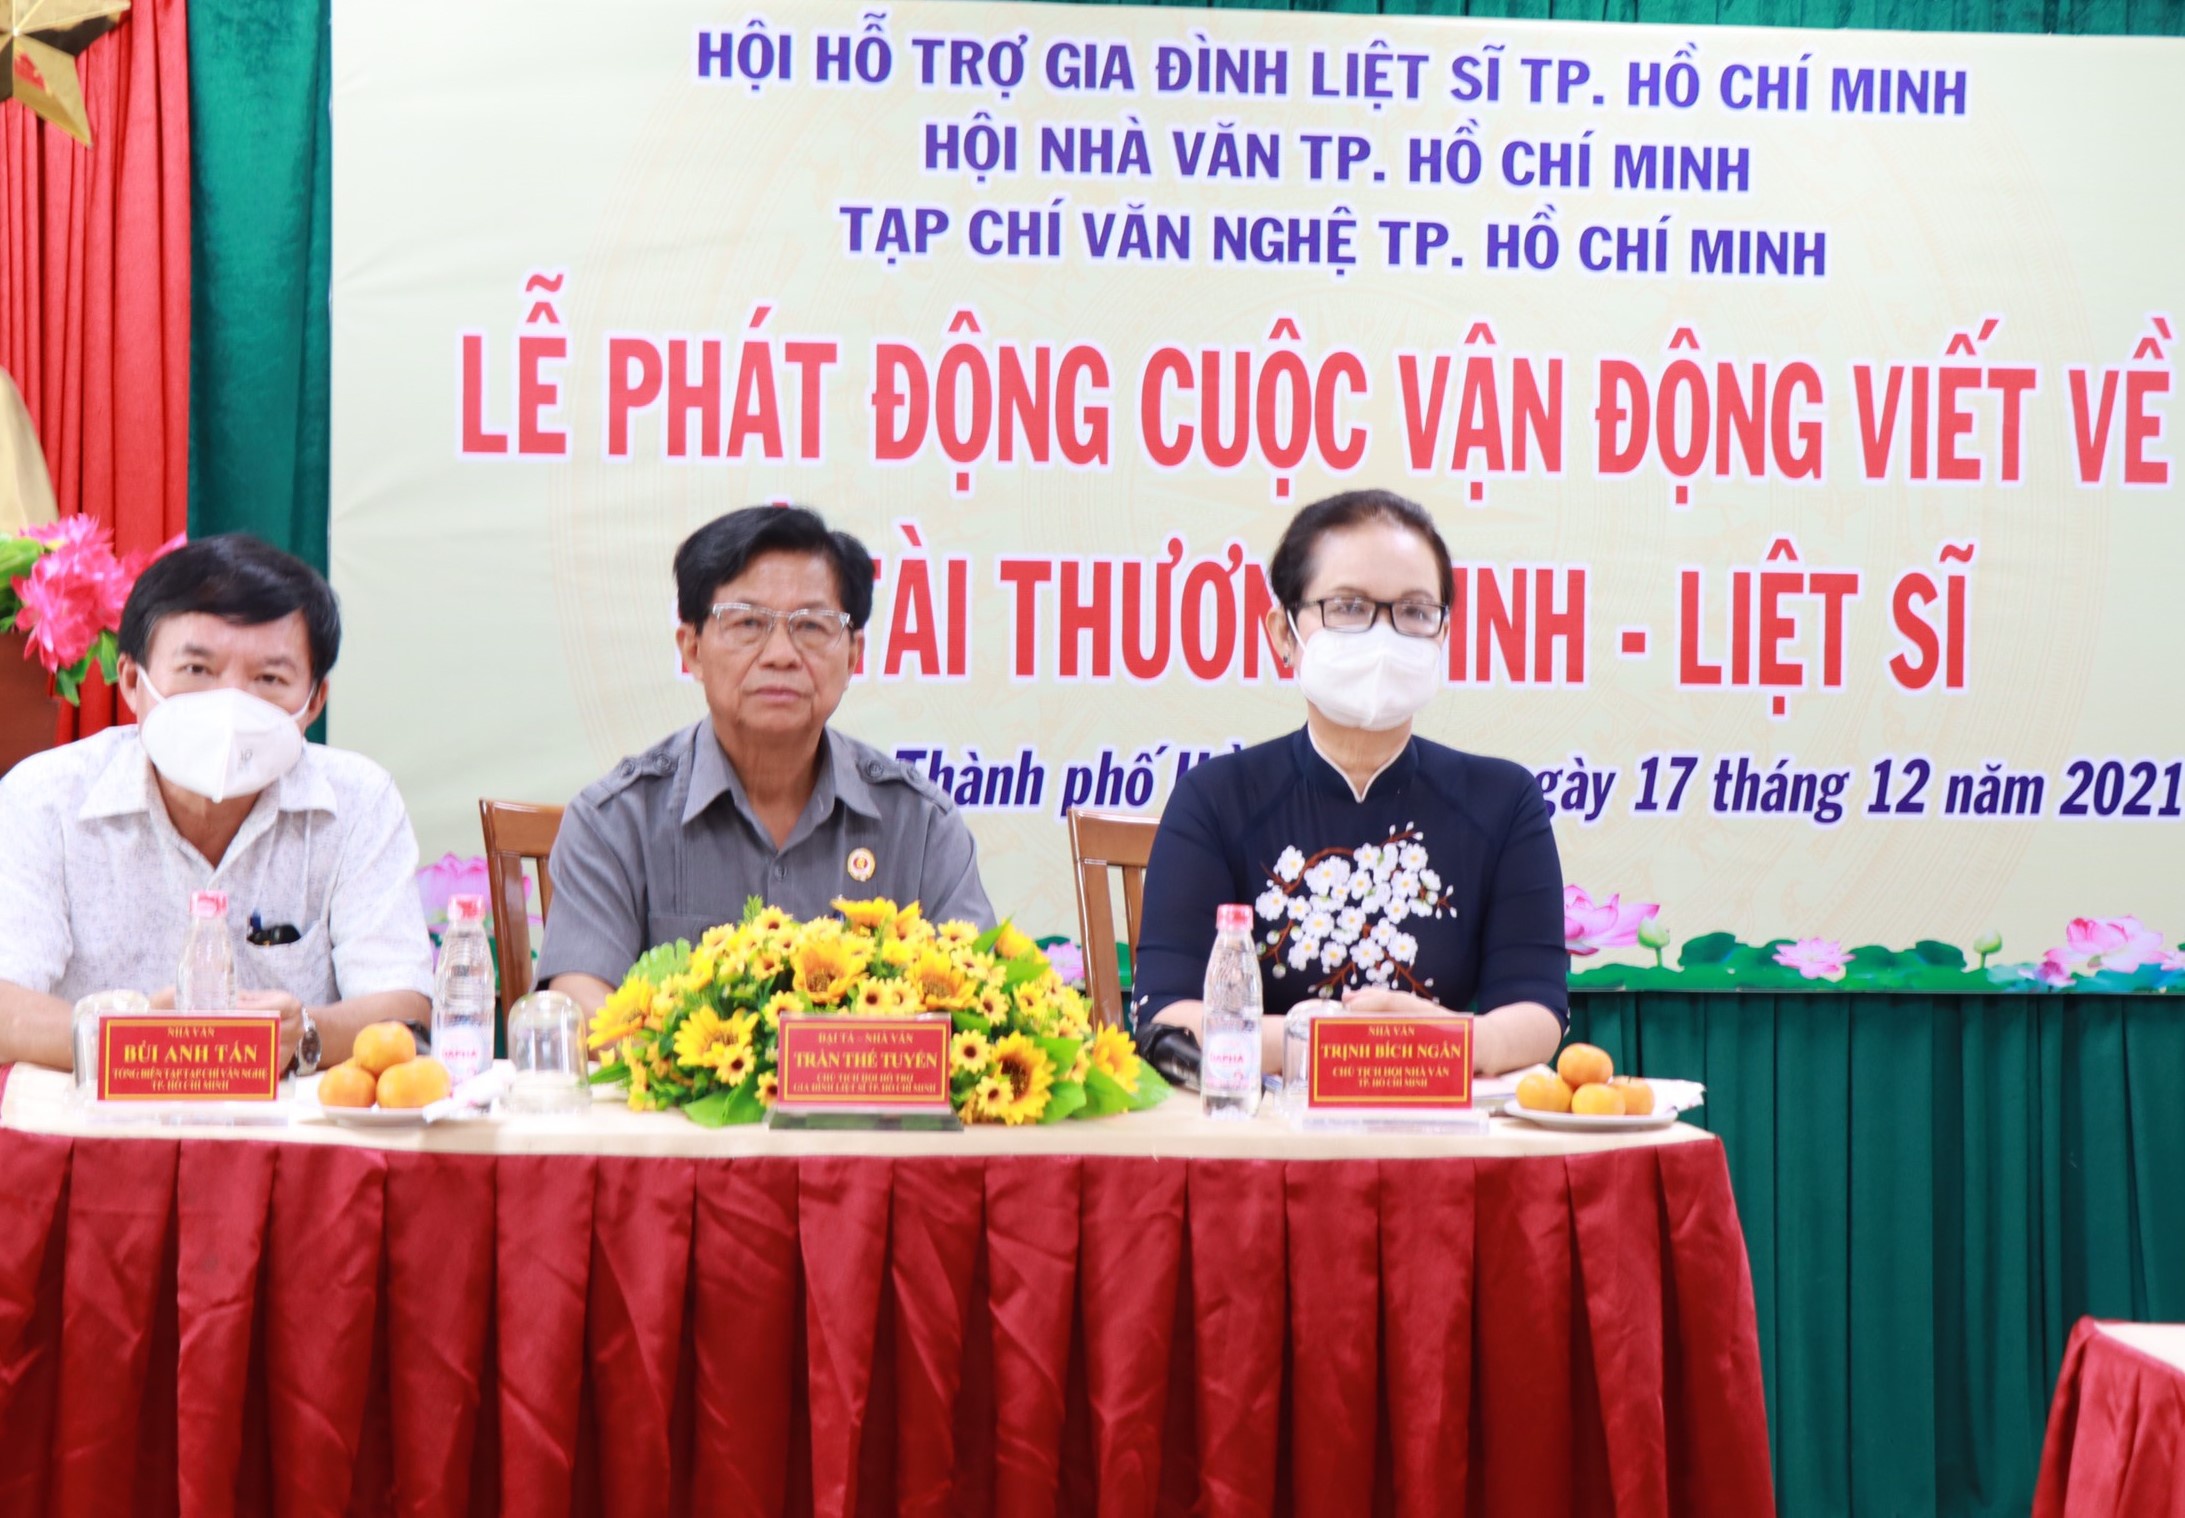 Cuoc thi viet ve thuong binh liet si anh 1